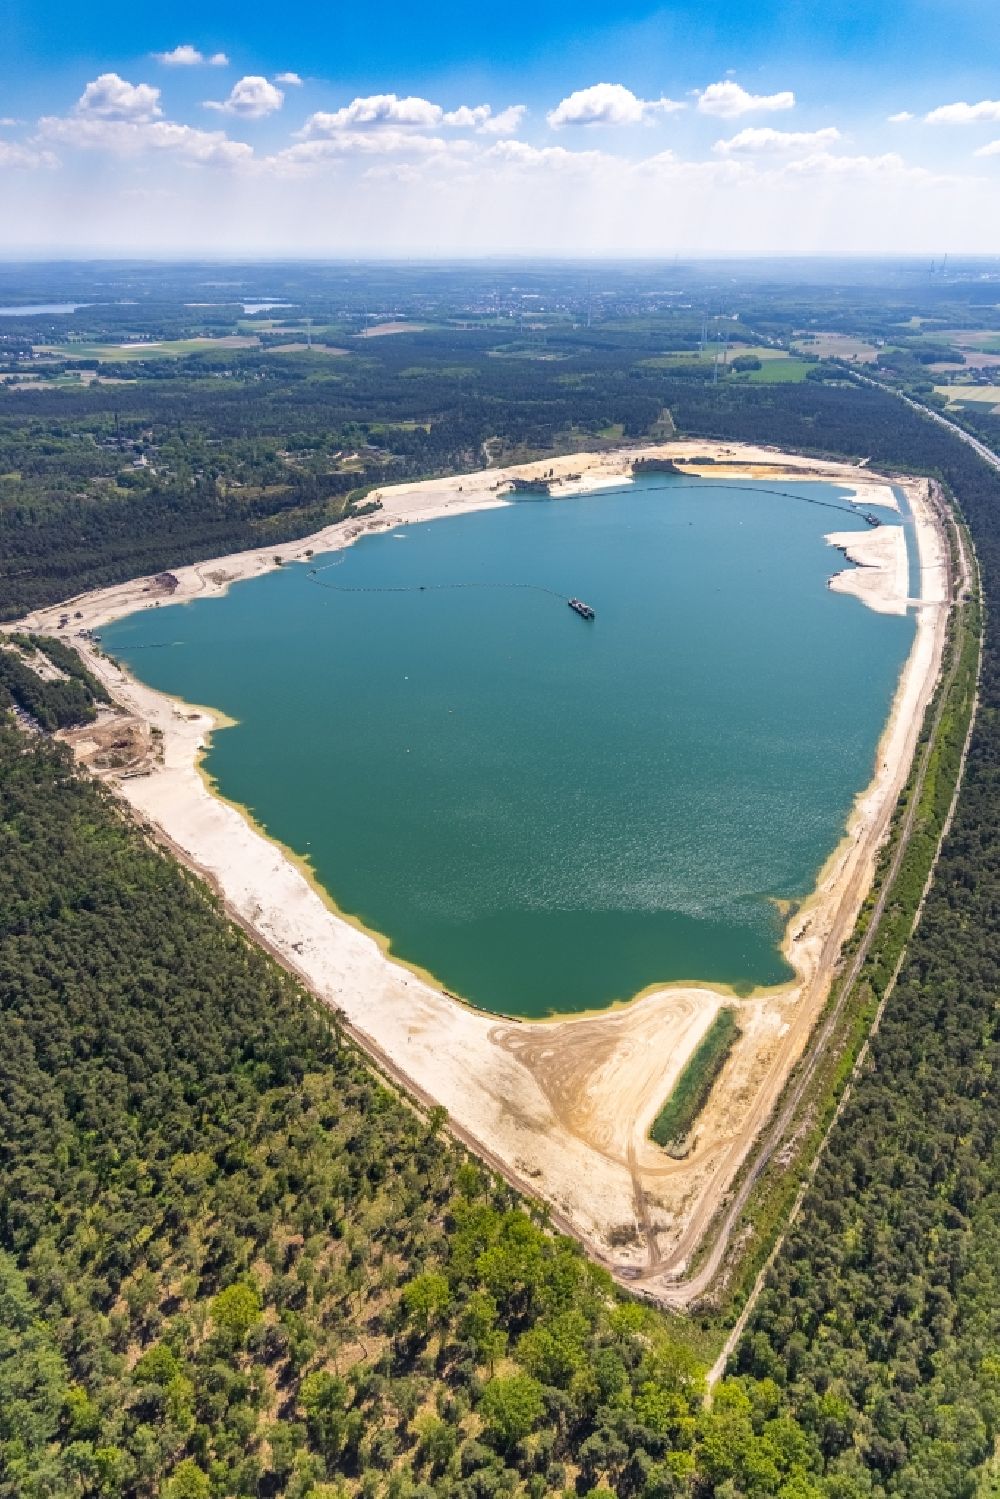 Aerial photograph Haltern am See - Aerial view of the Silver Lake with quartz sand extraction in a forest area in the district of Lehmbraken in Haltern am See in the Ruhr area in North Rhine-Westphalia, Germany